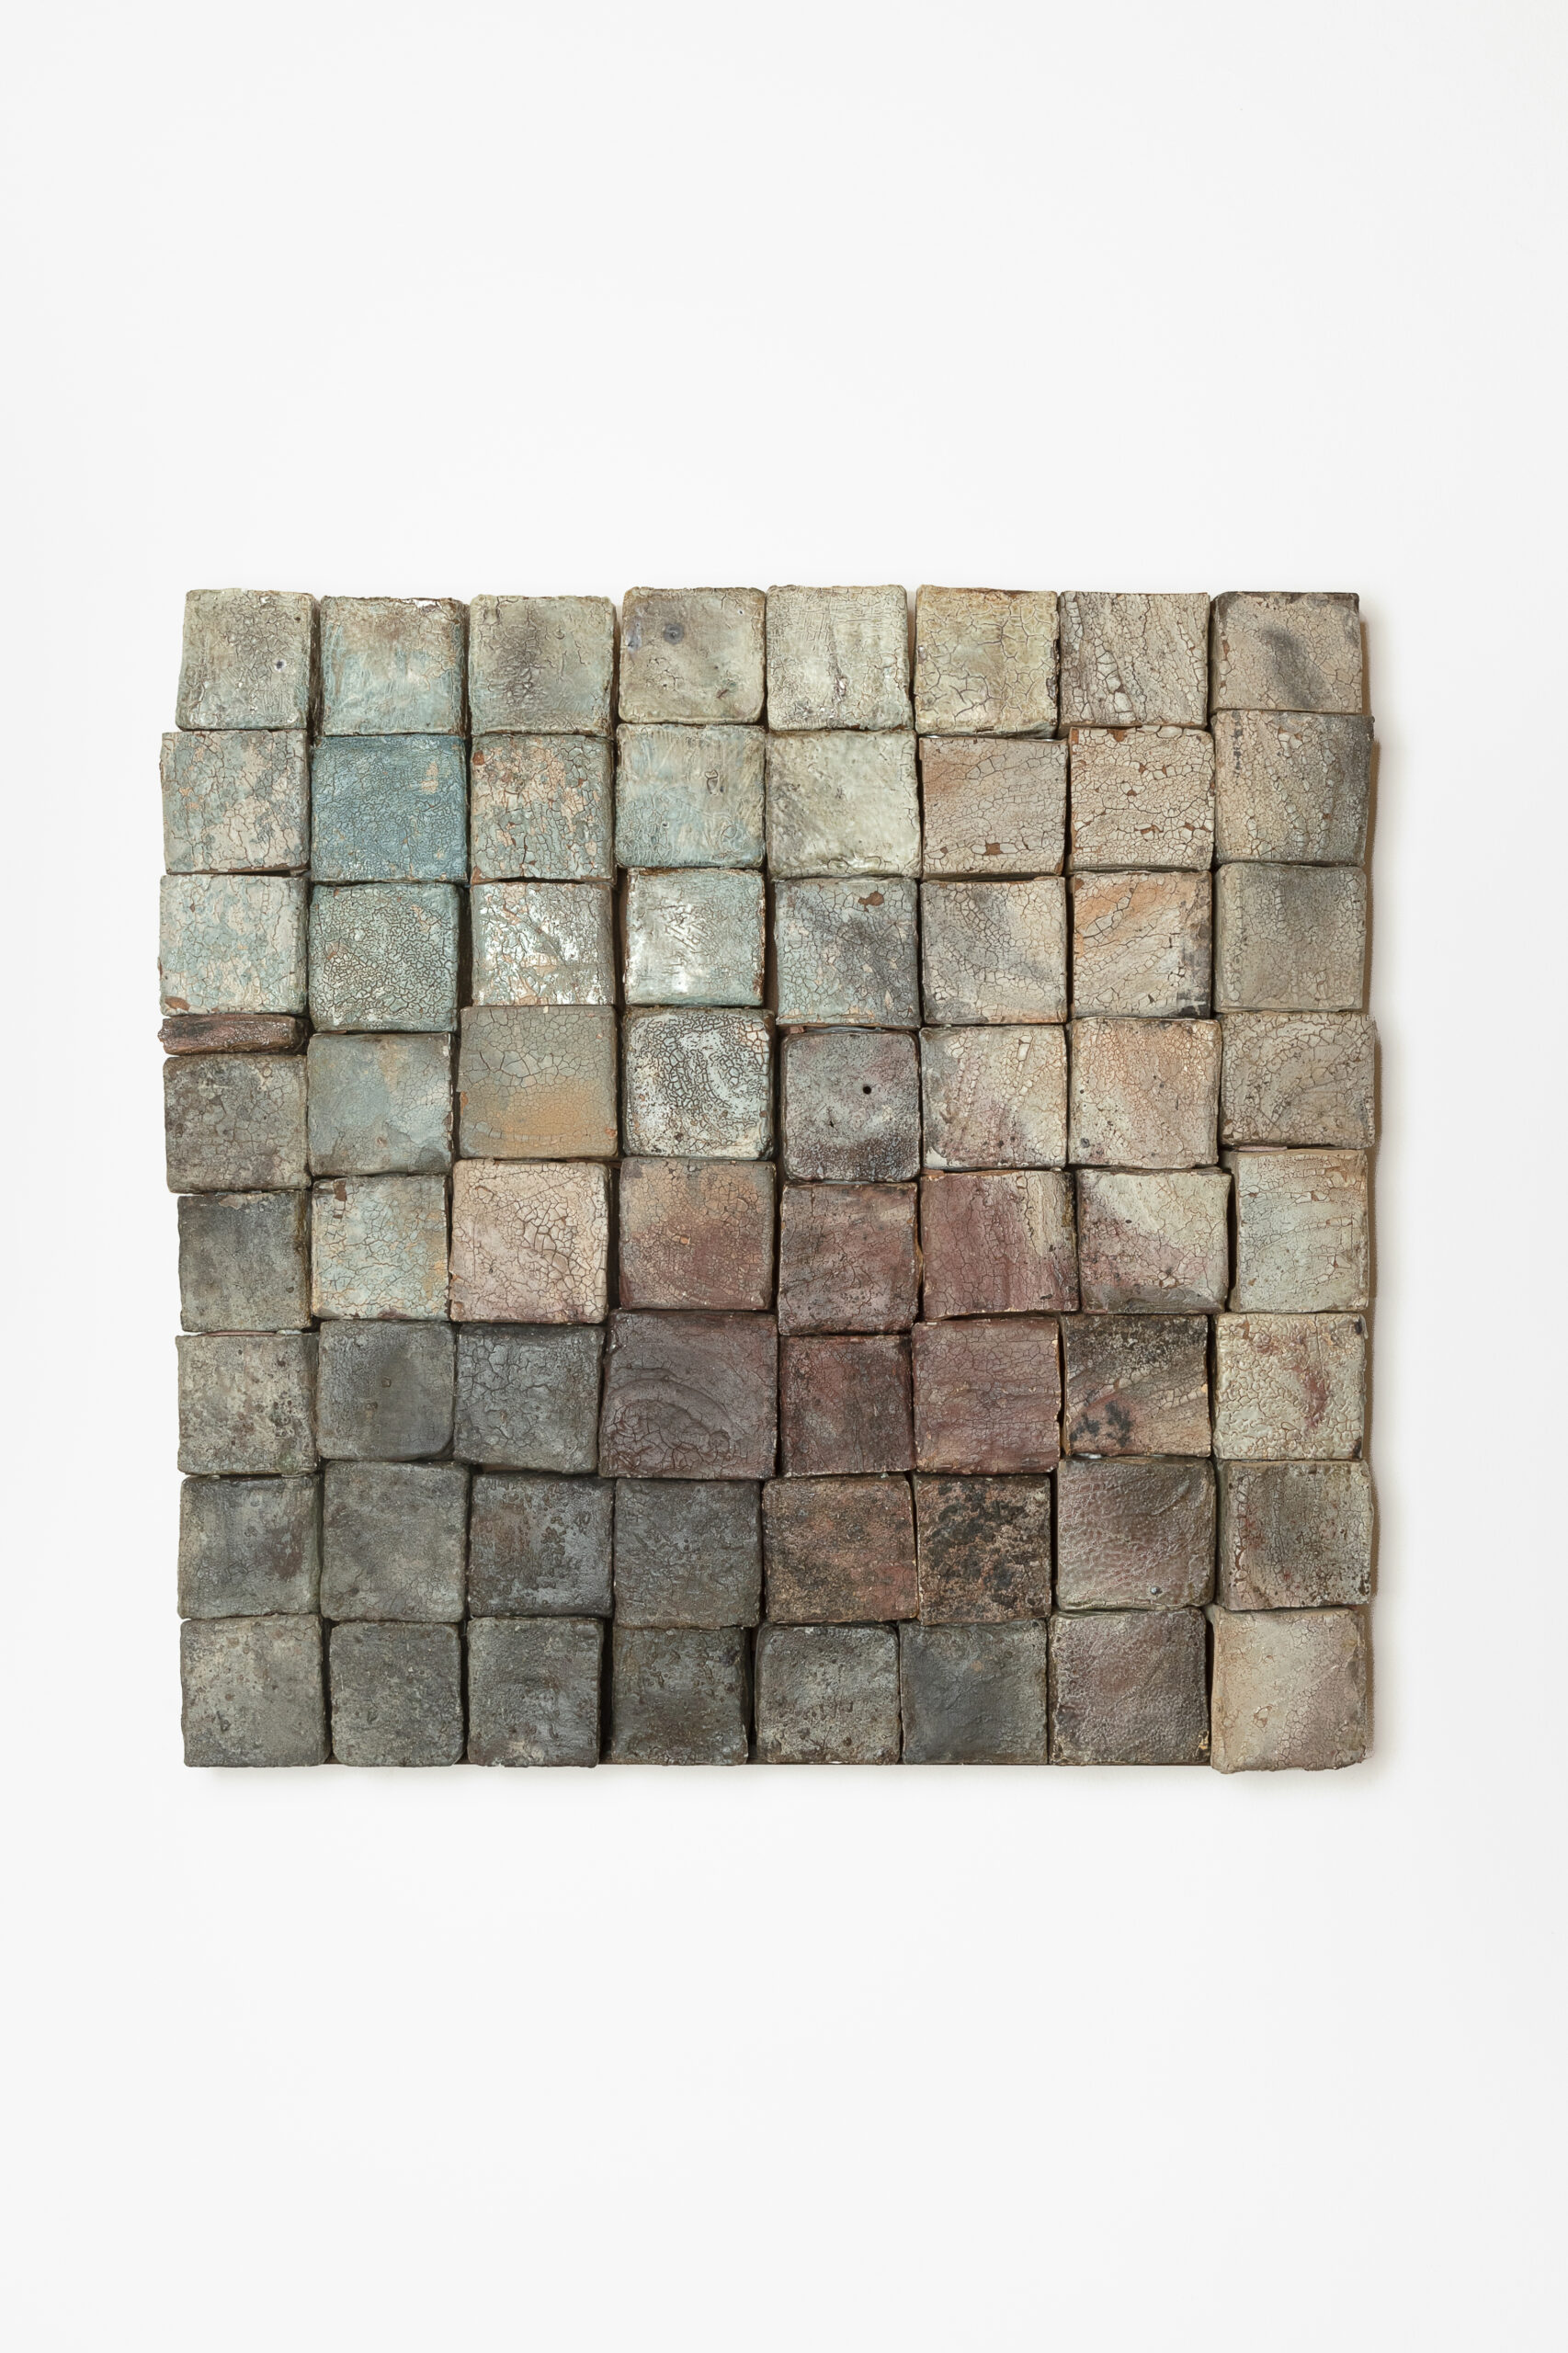 
							

									Daniel Johnston									Untitled IV 2024									Hand-built bricks from locally sourced clay, wood-fired<br />
32 3/4 x 32 3/4 x 4 inches<br />
sold									


							